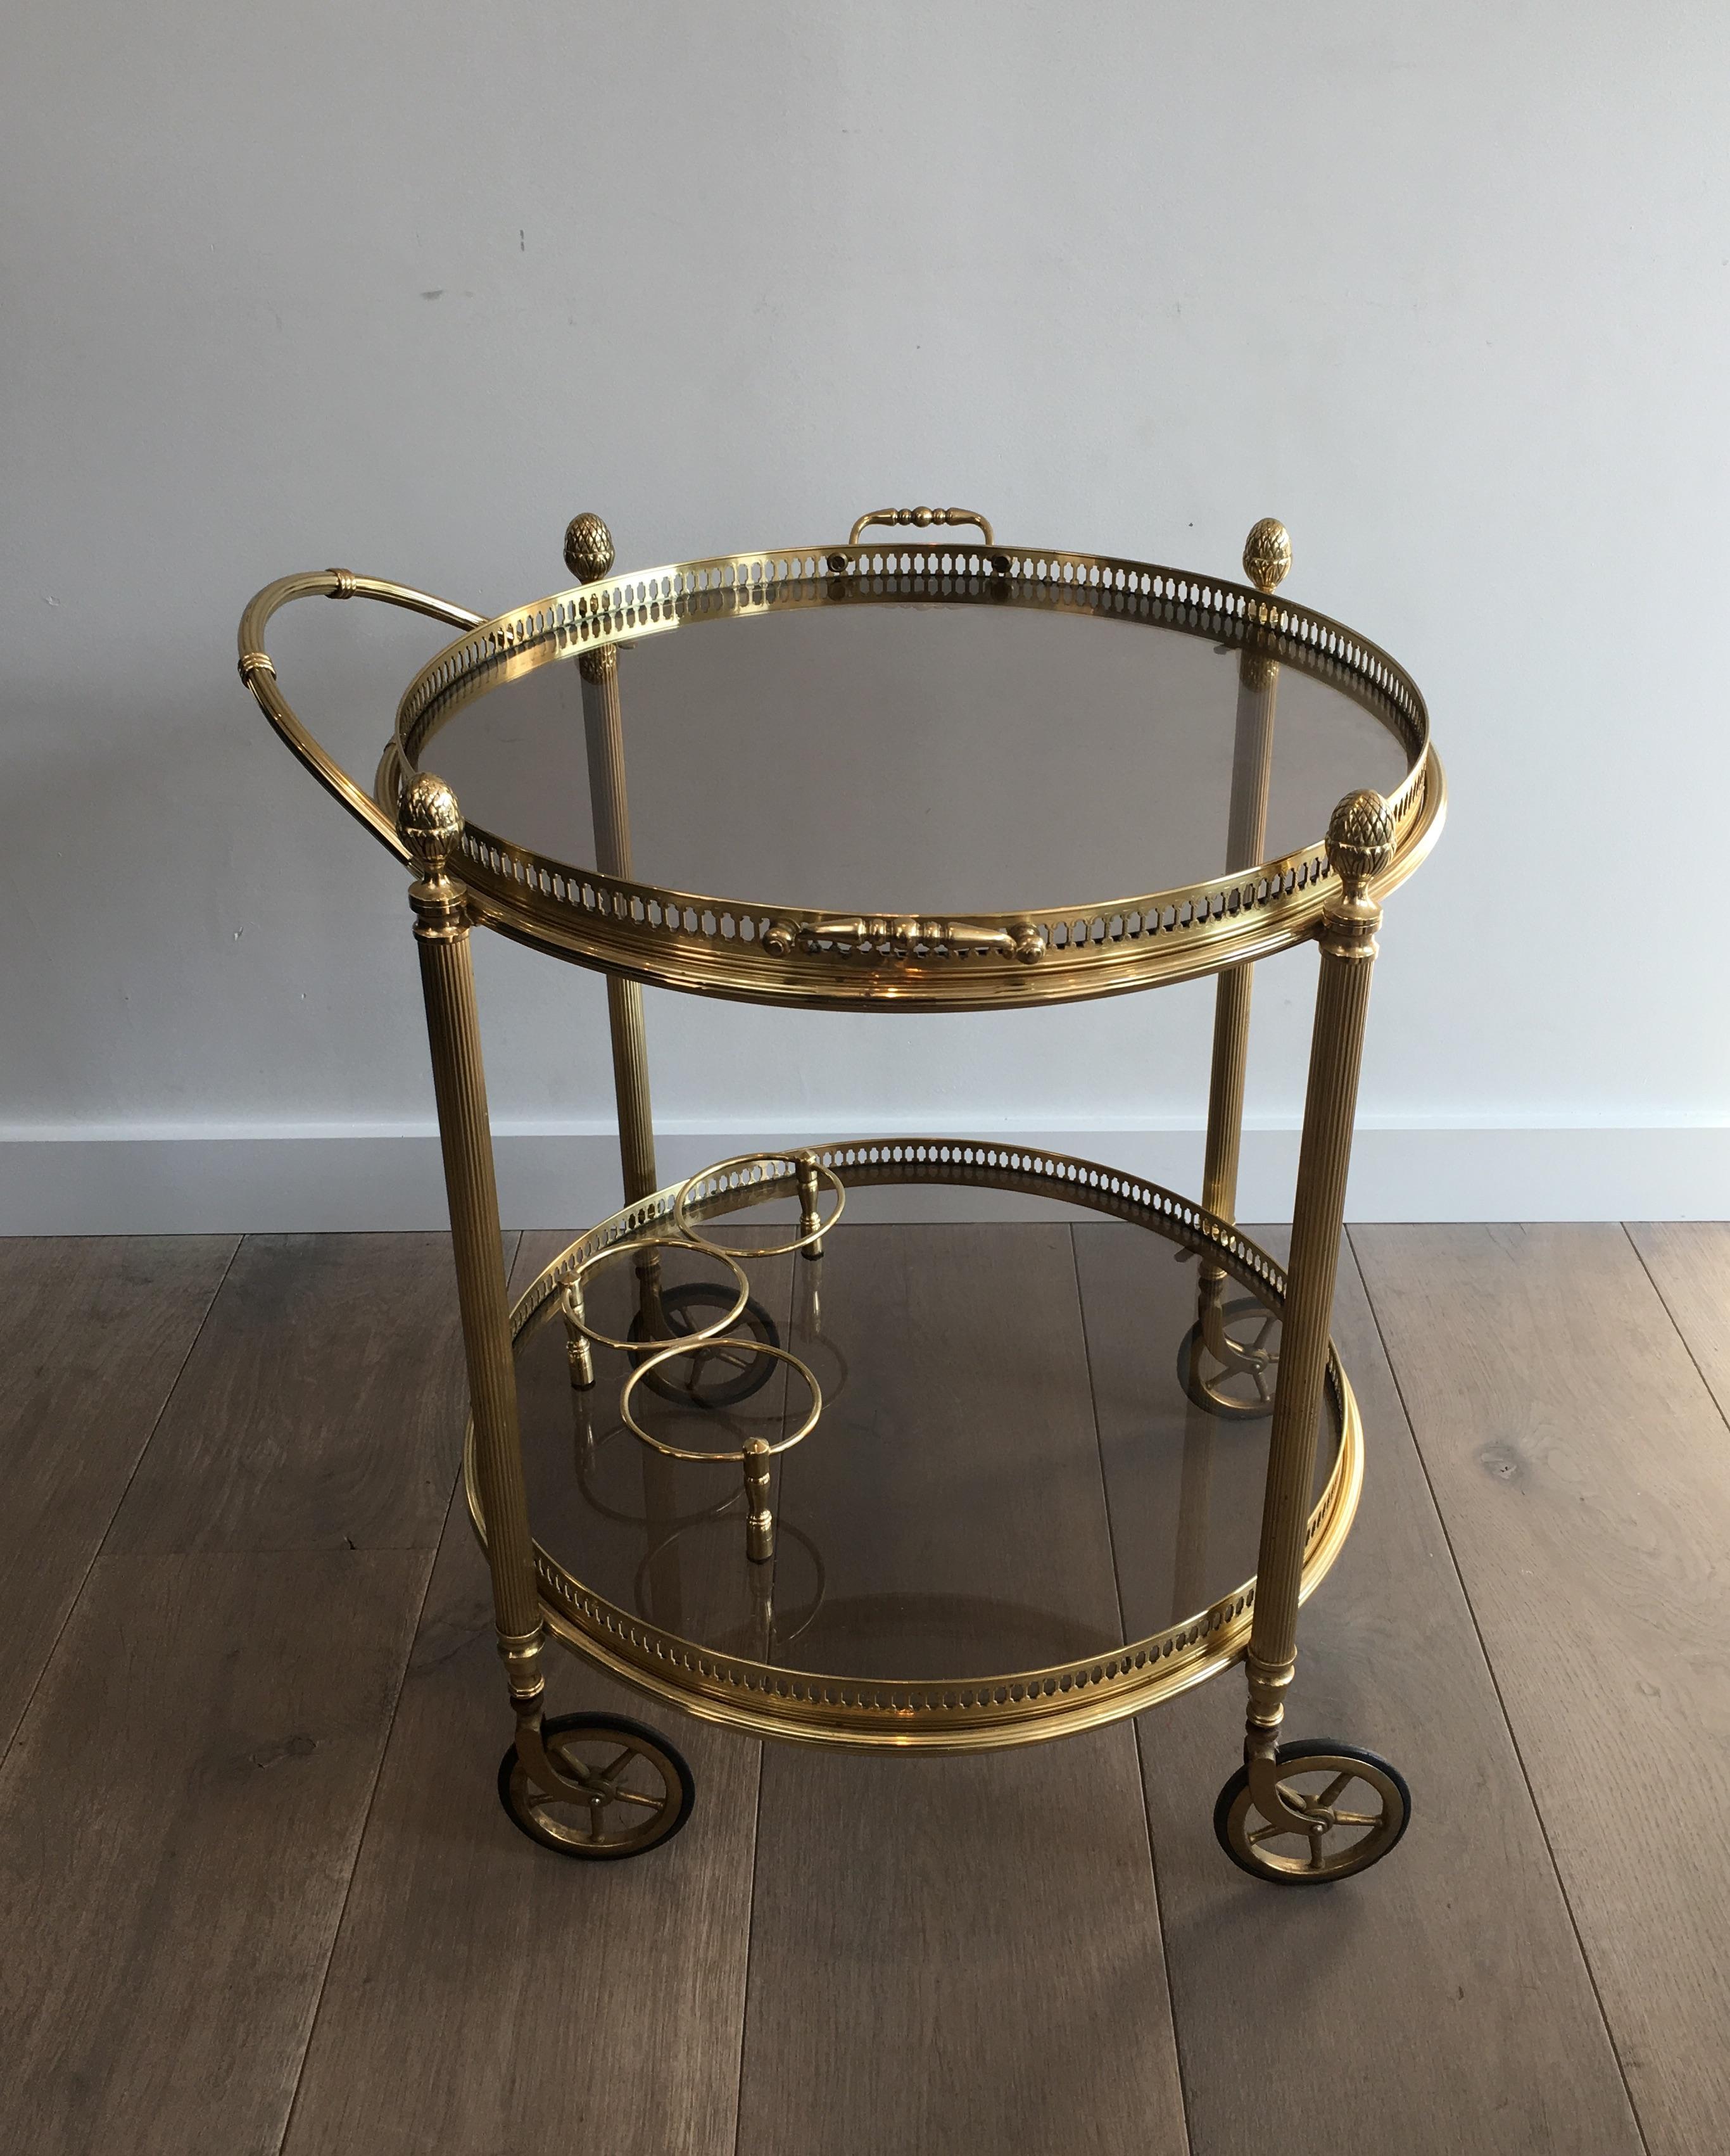 Maison Bagués. Neoclassical round brass drinks trolley. Smoked glass. French, circa 1940.
Smoked glass can be replaced for clear glass (quote on request).